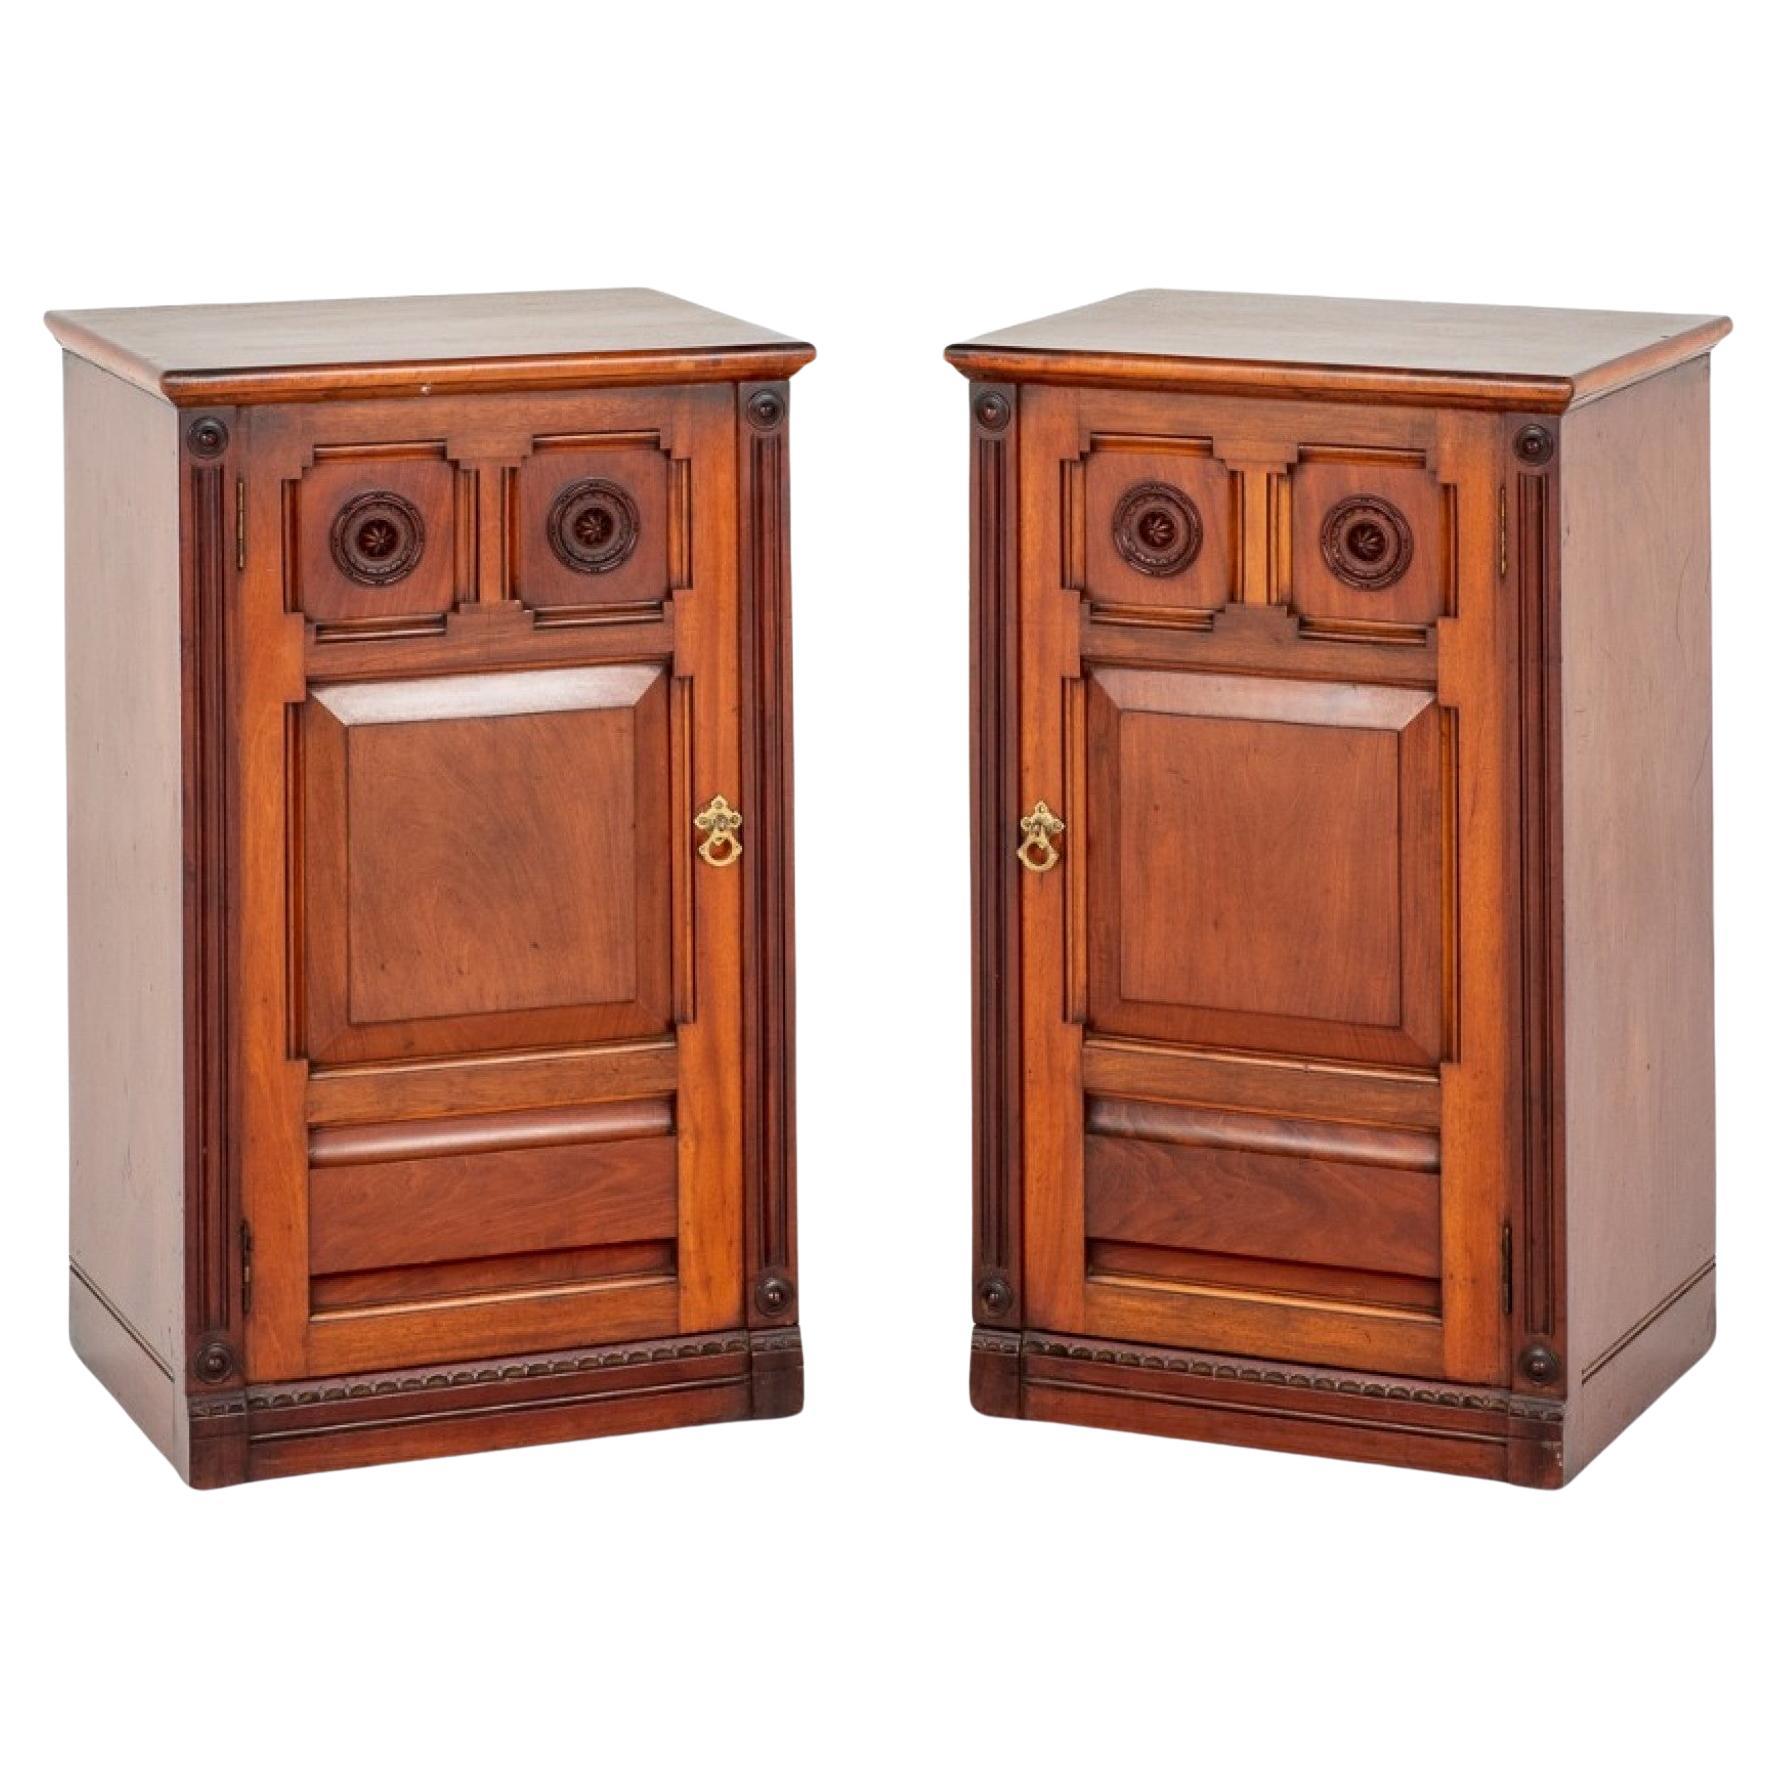 Pair Arts and Crafts Cabinets Mahogany Nightstands 1900